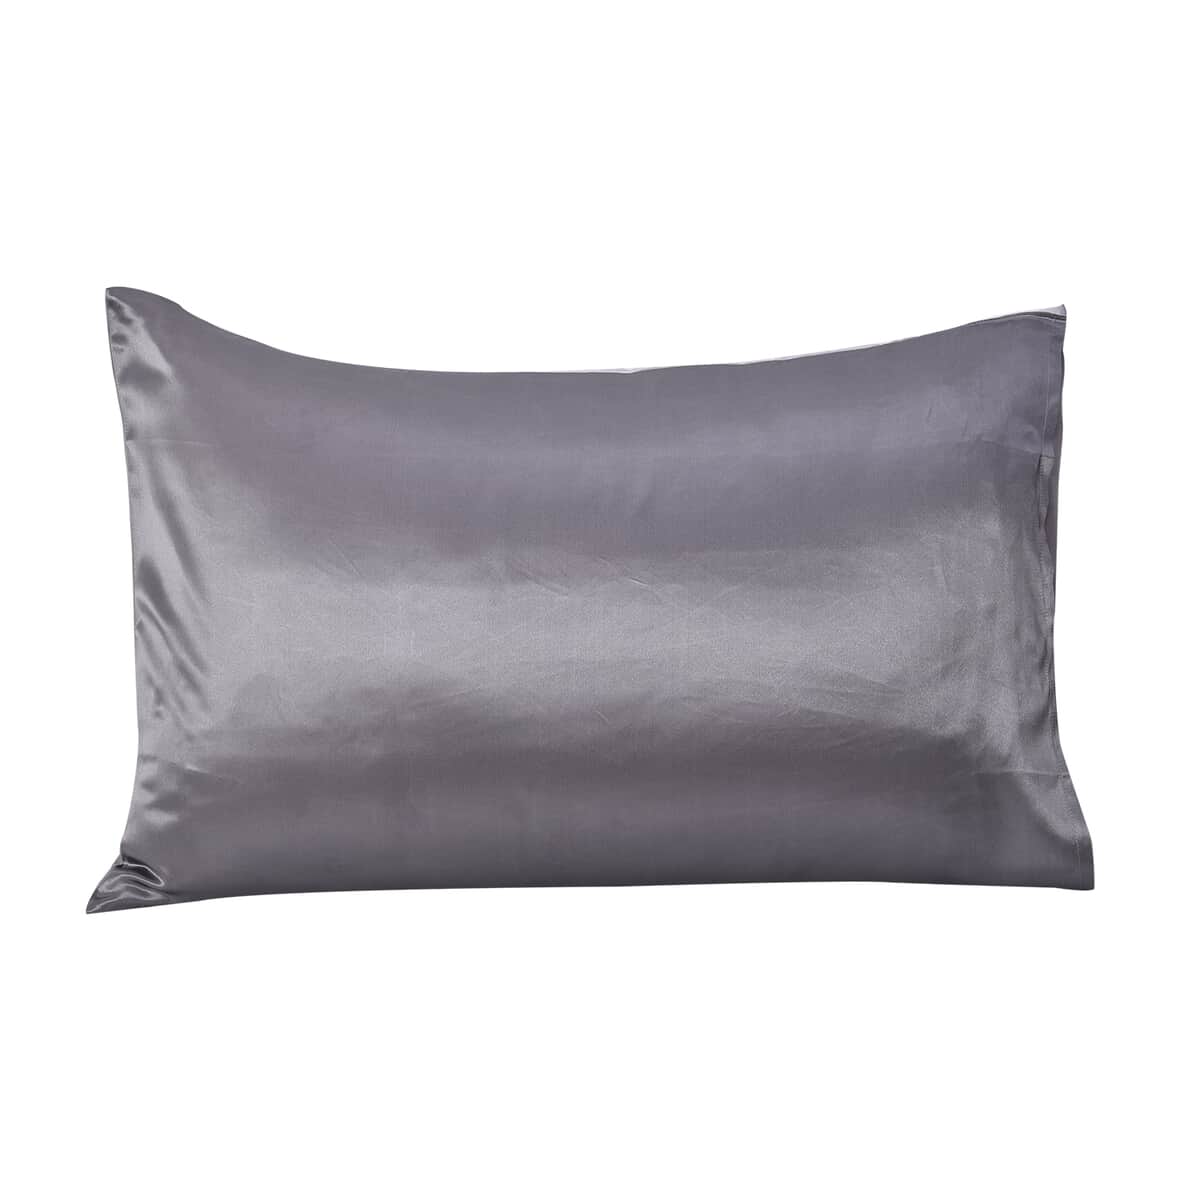 SYMPHONY HOME Gray 100% Mulberry Silk Pillowcase Infused with Hyaluronic Acid & Argan Oil - Queen , Pillow Protectors , Pillow Cover , Cushion Cover , Pillow Shams , Pillow Case Covers image number 2